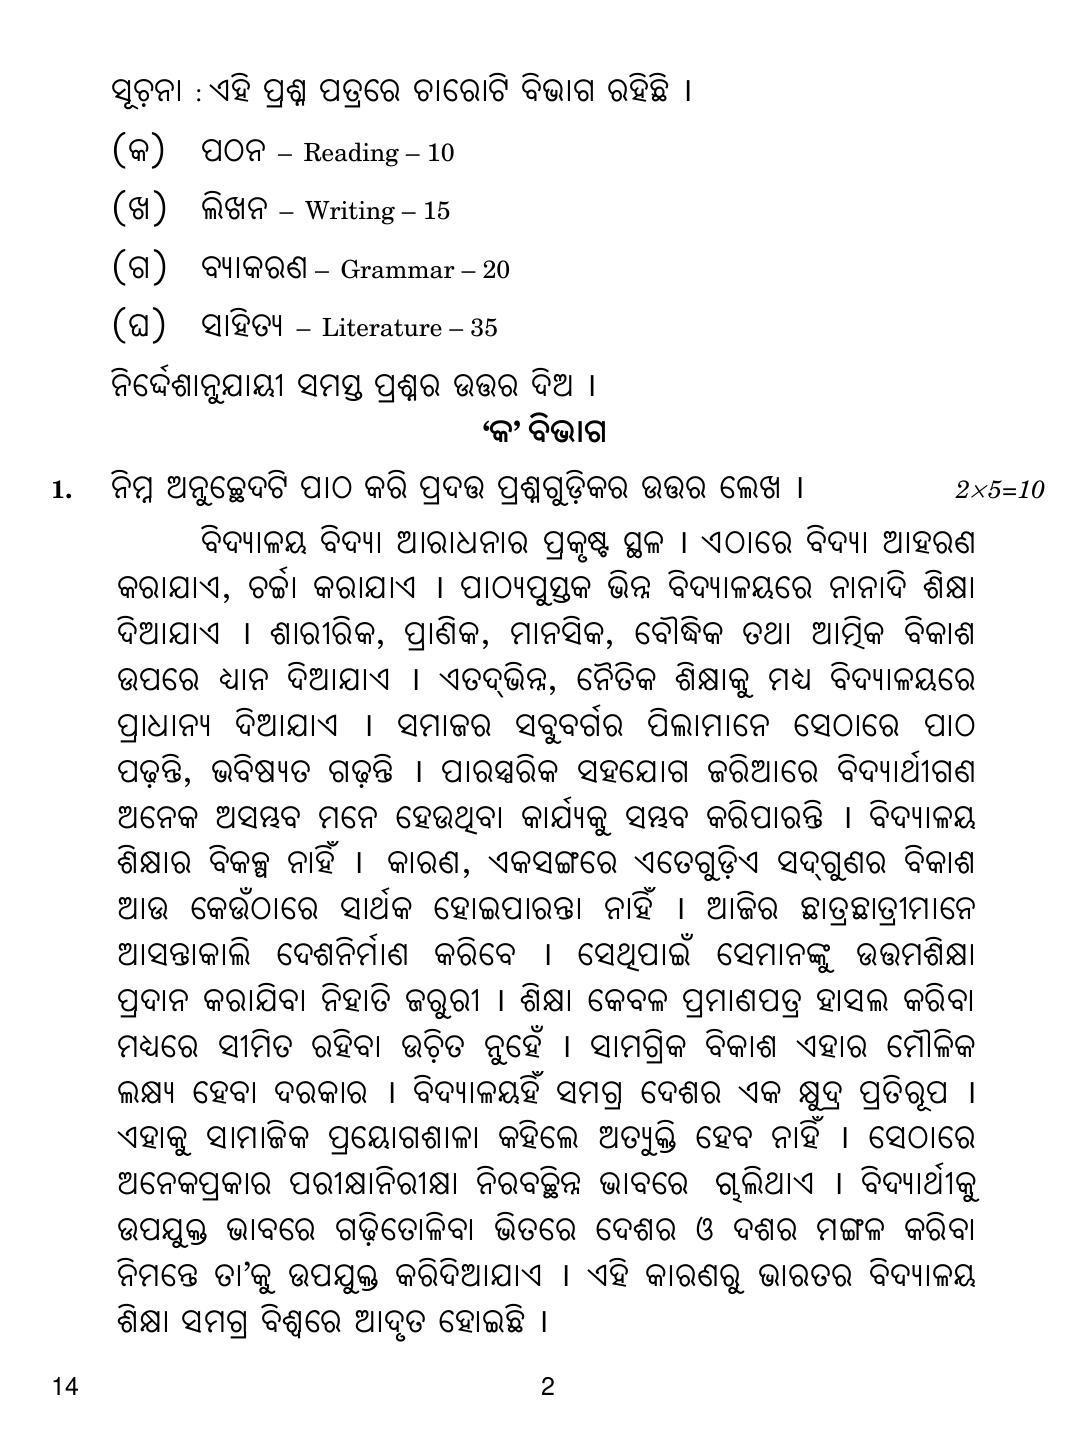 CBSE Class 10 14 Odia 2019 Question Paper - Page 2